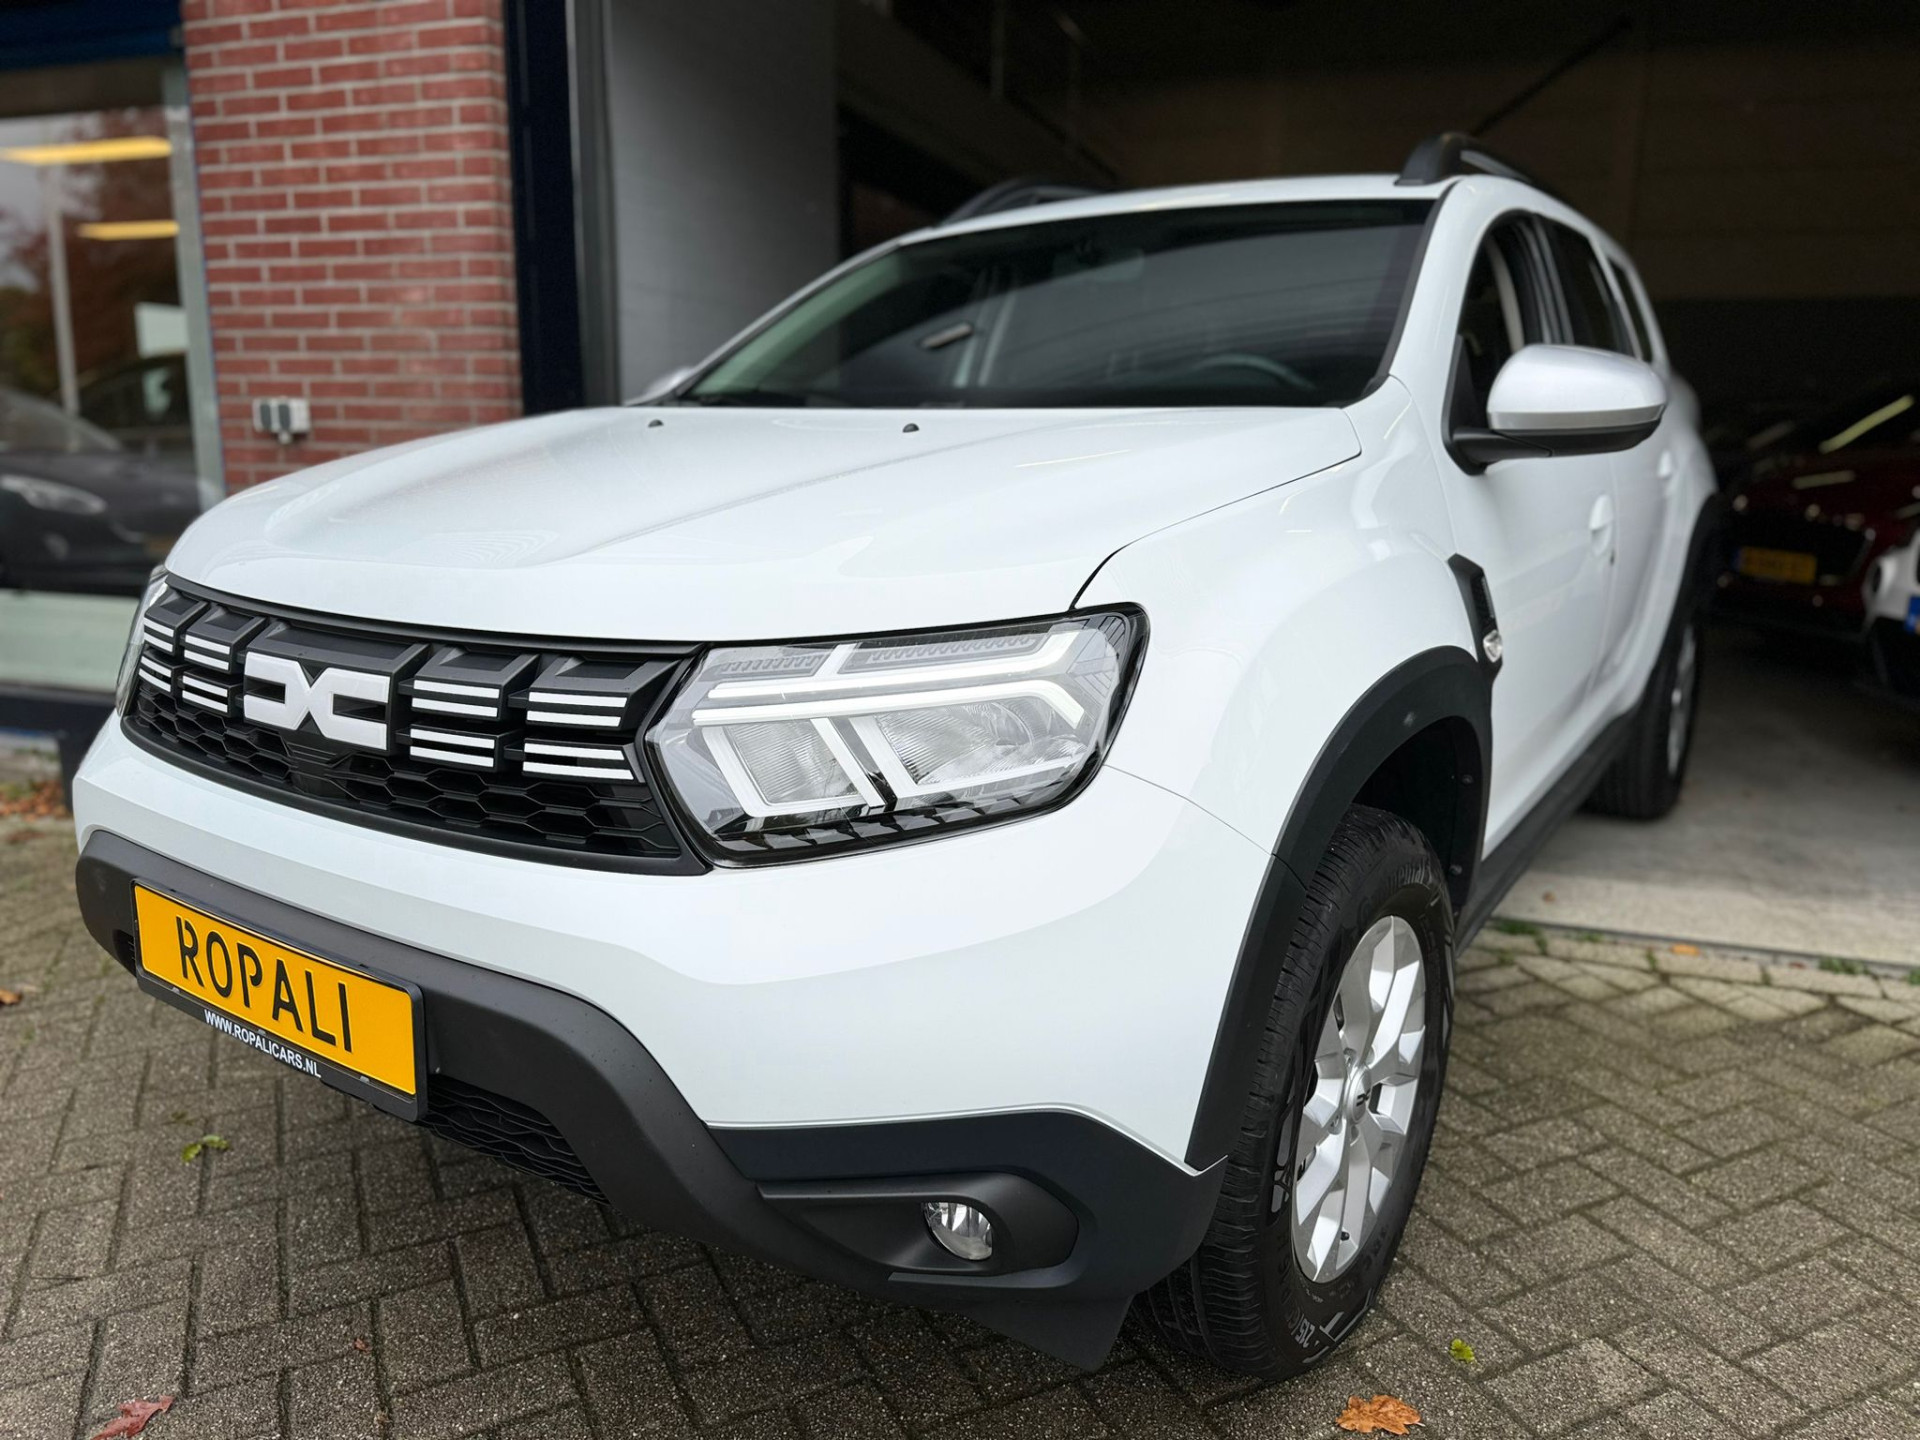 Dacia-Duster-1.3 TCe 150 Extreme-ropalicars.nl